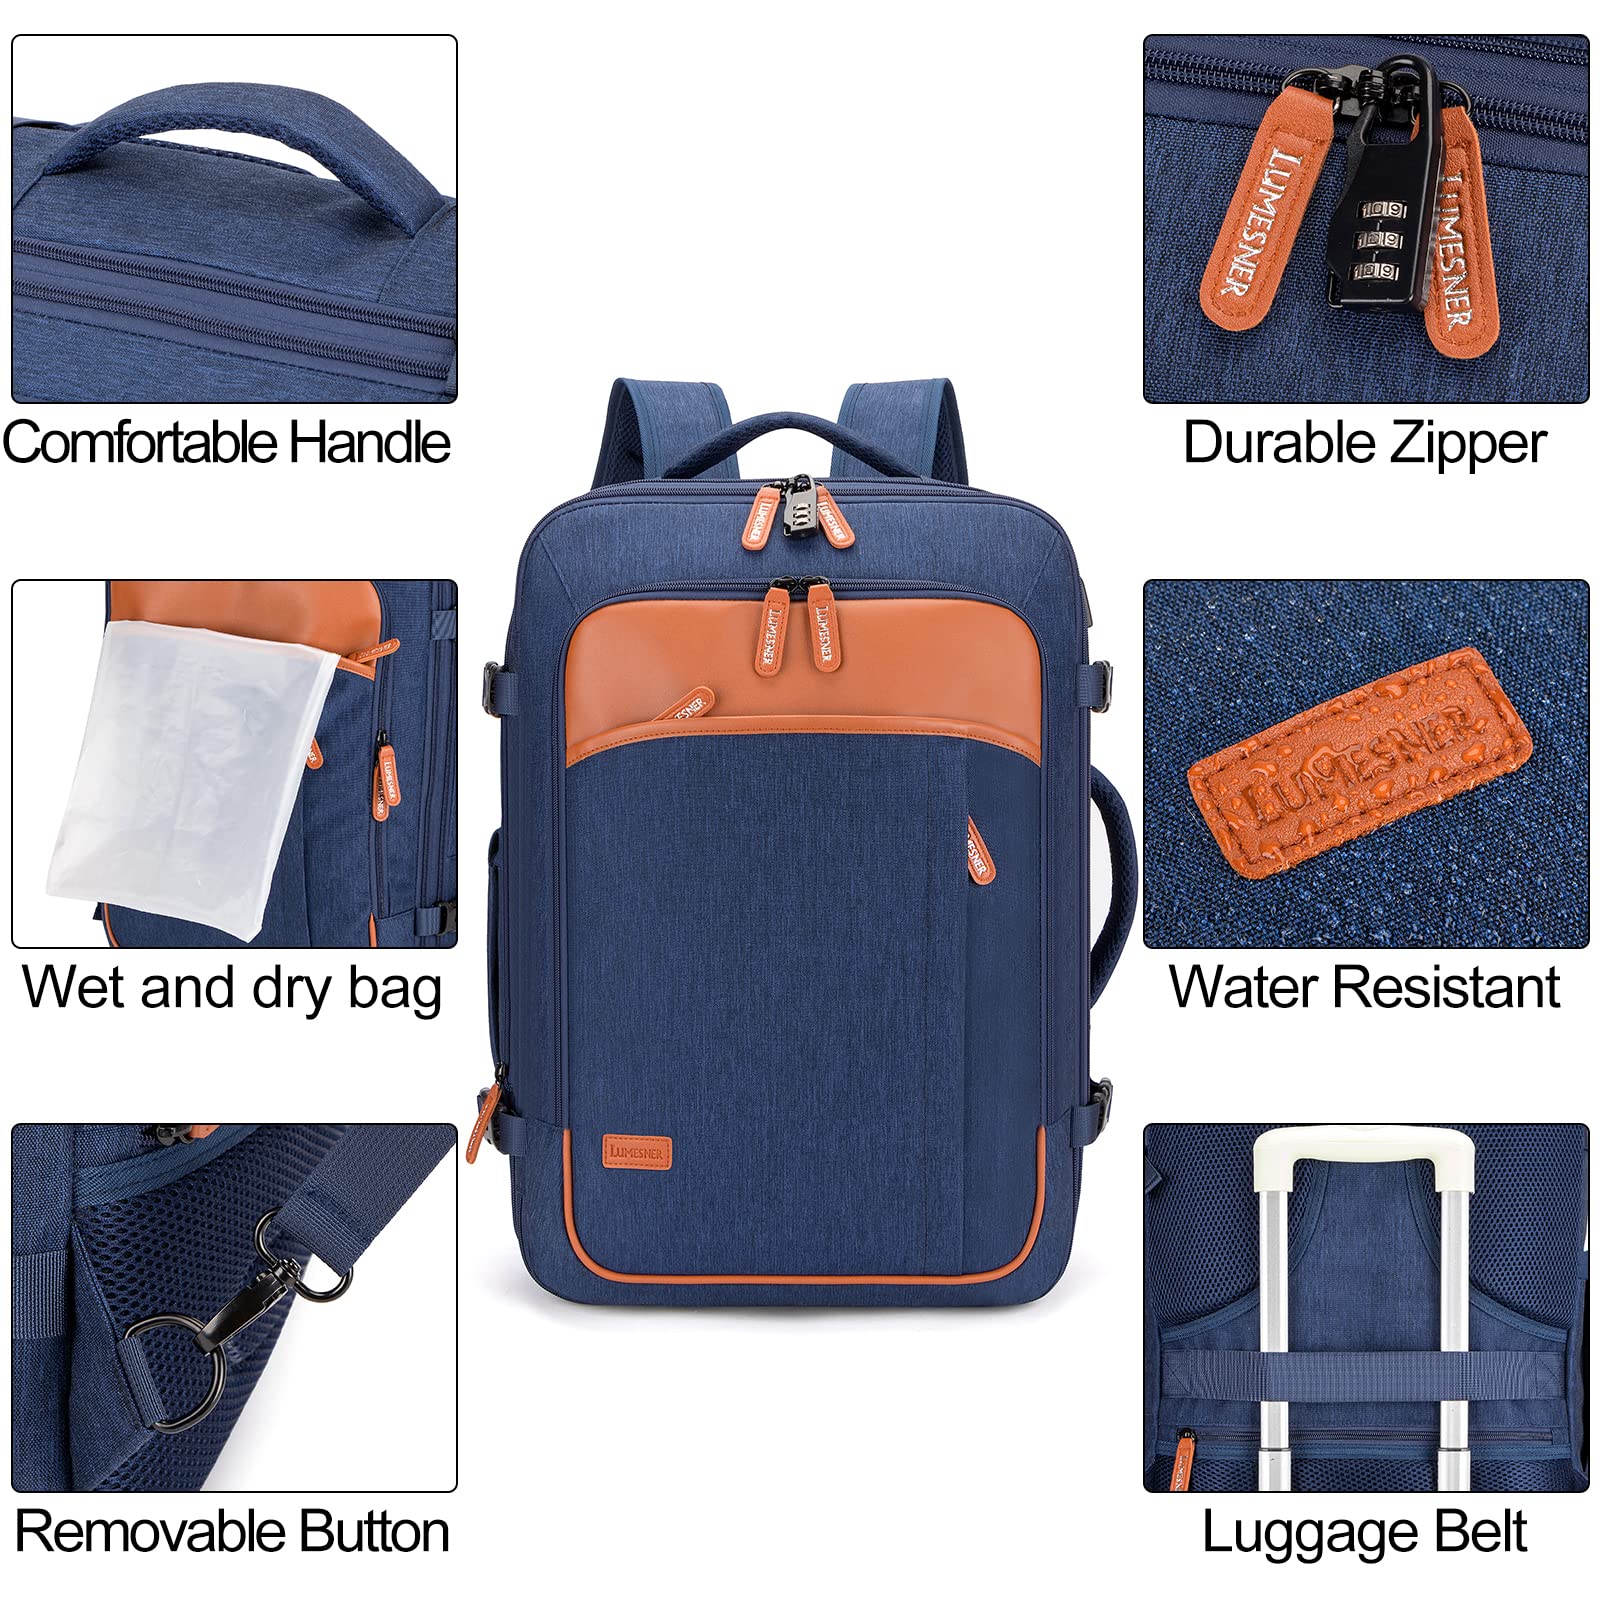 Lumesner Carry On Backpack, Blue, 40L Capacity, Expandable, Water Resistant, Suitable for Men and Women, Ideal for Travel